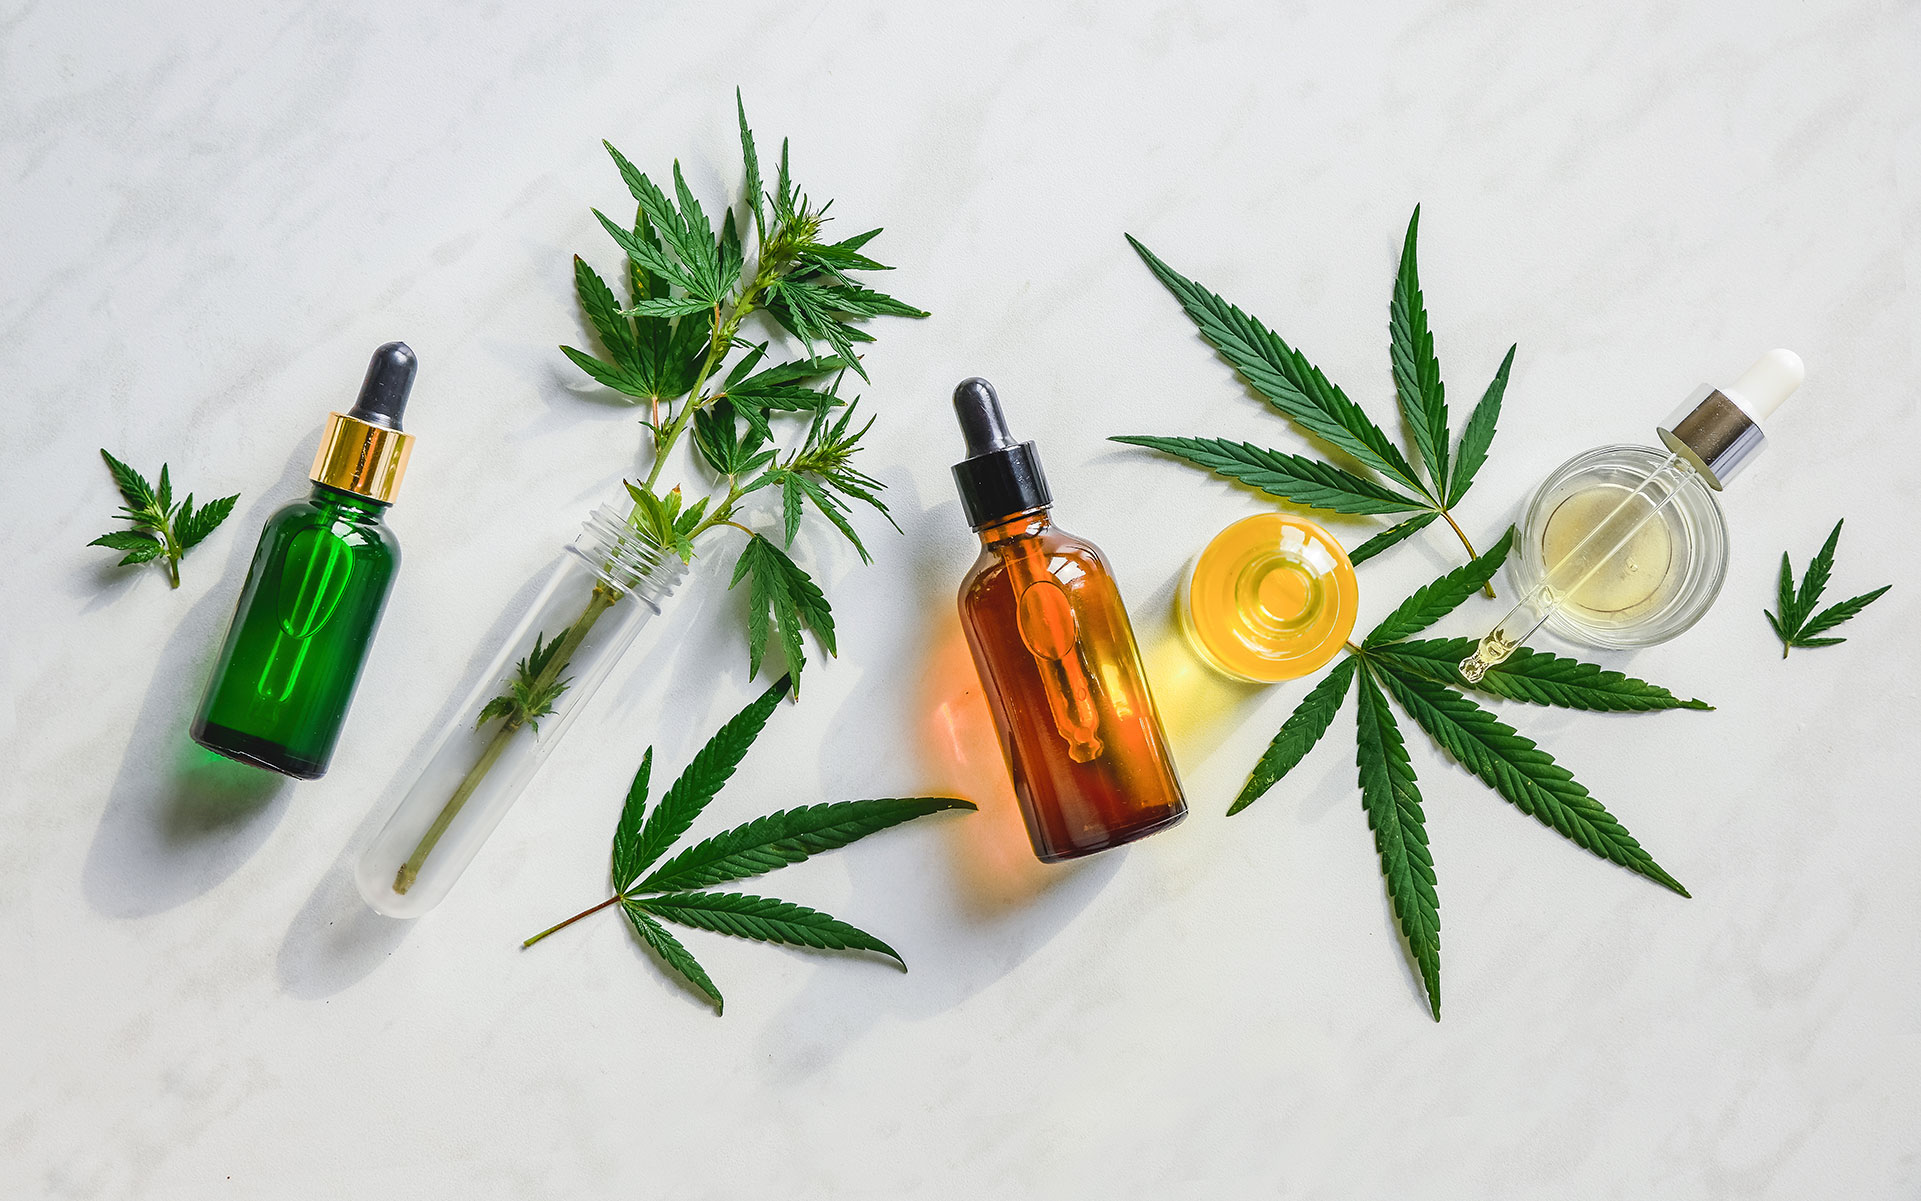 What States Sell Cbd Oil - Cbd|Oil|Cannabidiol|Products|View|Abstract|Effects|Hemp|Cannabis|Product|Thc|Pain|People|Health|Body|Plant|Cannabinoids|Medications|Oils|Drug|Benefits|System|Study|Marijuana|Anxiety|Side|Research|Effect|Liver|Quality|Treatment|Studies|Epilepsy|Symptoms|Gummies|Compounds|Dose|Time|Inflammation|Bottle|Cbd Oil|View Abstract|Side Effects|Cbd Products|Endocannabinoid System|Multiple Sclerosis|Cbd Oils|Cbd Gummies|Cannabis Plant|Hemp Oil|Cbd Product|Hemp Plant|United States|Cytochrome P450|Many People|Chronic Pain|Nuleaf Naturals|Royal Cbd|Full-Spectrum Cbd Oil|Drug Administration|Cbd Oil Products|Medical Marijuana|Drug Test|Heavy Metals|Clinical Trial|Clinical Trials|Cbd Oil Side|Rating Highlights|Wide Variety|Animal Studies